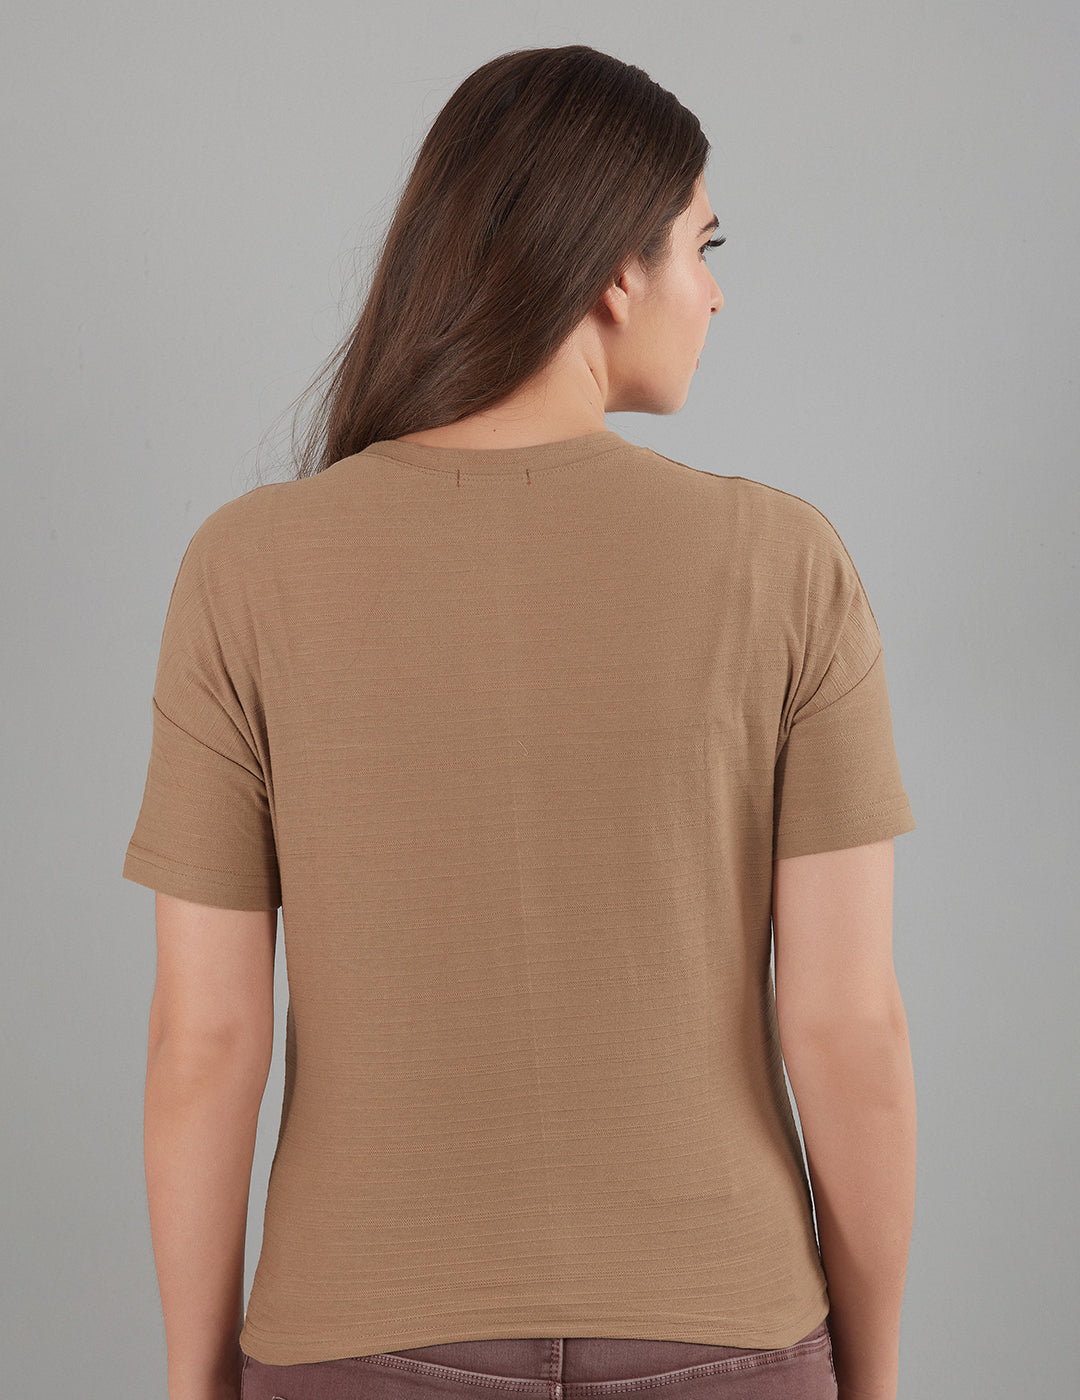 Stylish Plain Short T-Shirts for women In Tortilla At Best Price